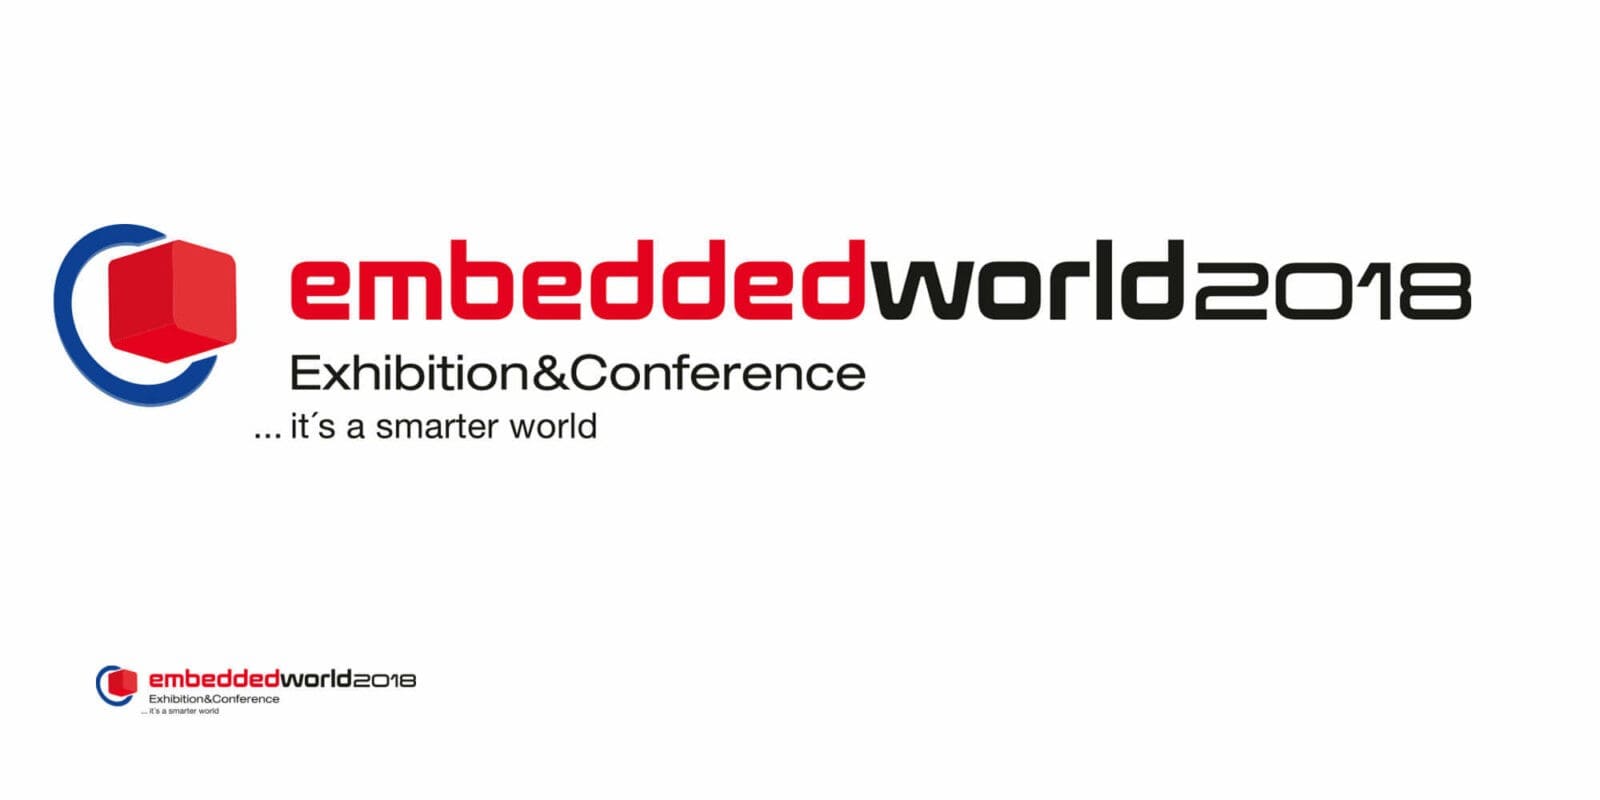 Inspiration and connection at Embedded World 2018